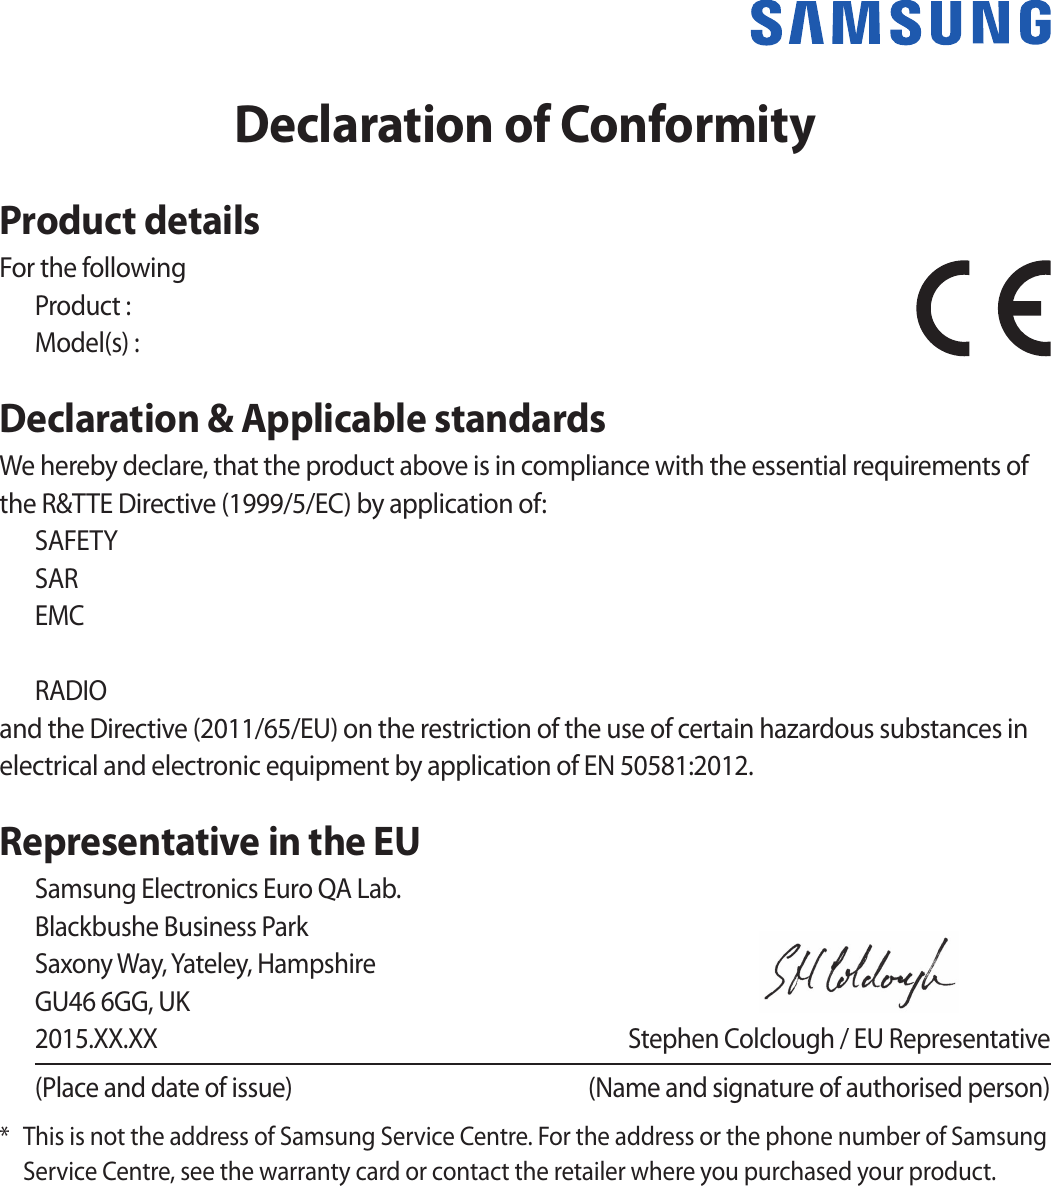 Declaration of ConformityProduct detailsFor the followingProduct : Model(s) : Declaration &amp; Applicable standardsWe hereby declare, that the product above is in compliance with the essential requirements of the R&amp;TTE Directive (1999/5/EC) by application of:SAFETY SAR EMC    RADIO and the Directive (2011/65/EU) on the restriction of the use of certain hazardous substances in electrical and electronic equipment by application of EN 50581:2012.Representative in the EUSamsung Electronics Euro QA Lab. Blackbushe Business Park Saxony Way, Yateley, Hampshire GU46 6GG, UK2015.XX.XX  Stephen Colclough / EU Representative(Place and date of issue)  (Name and signature of authorised person)*  This is not the address of Samsung Service Centre. For the address or the phone number of Samsung Service Centre, see the warranty card or contact the retailer where you purchased your product.